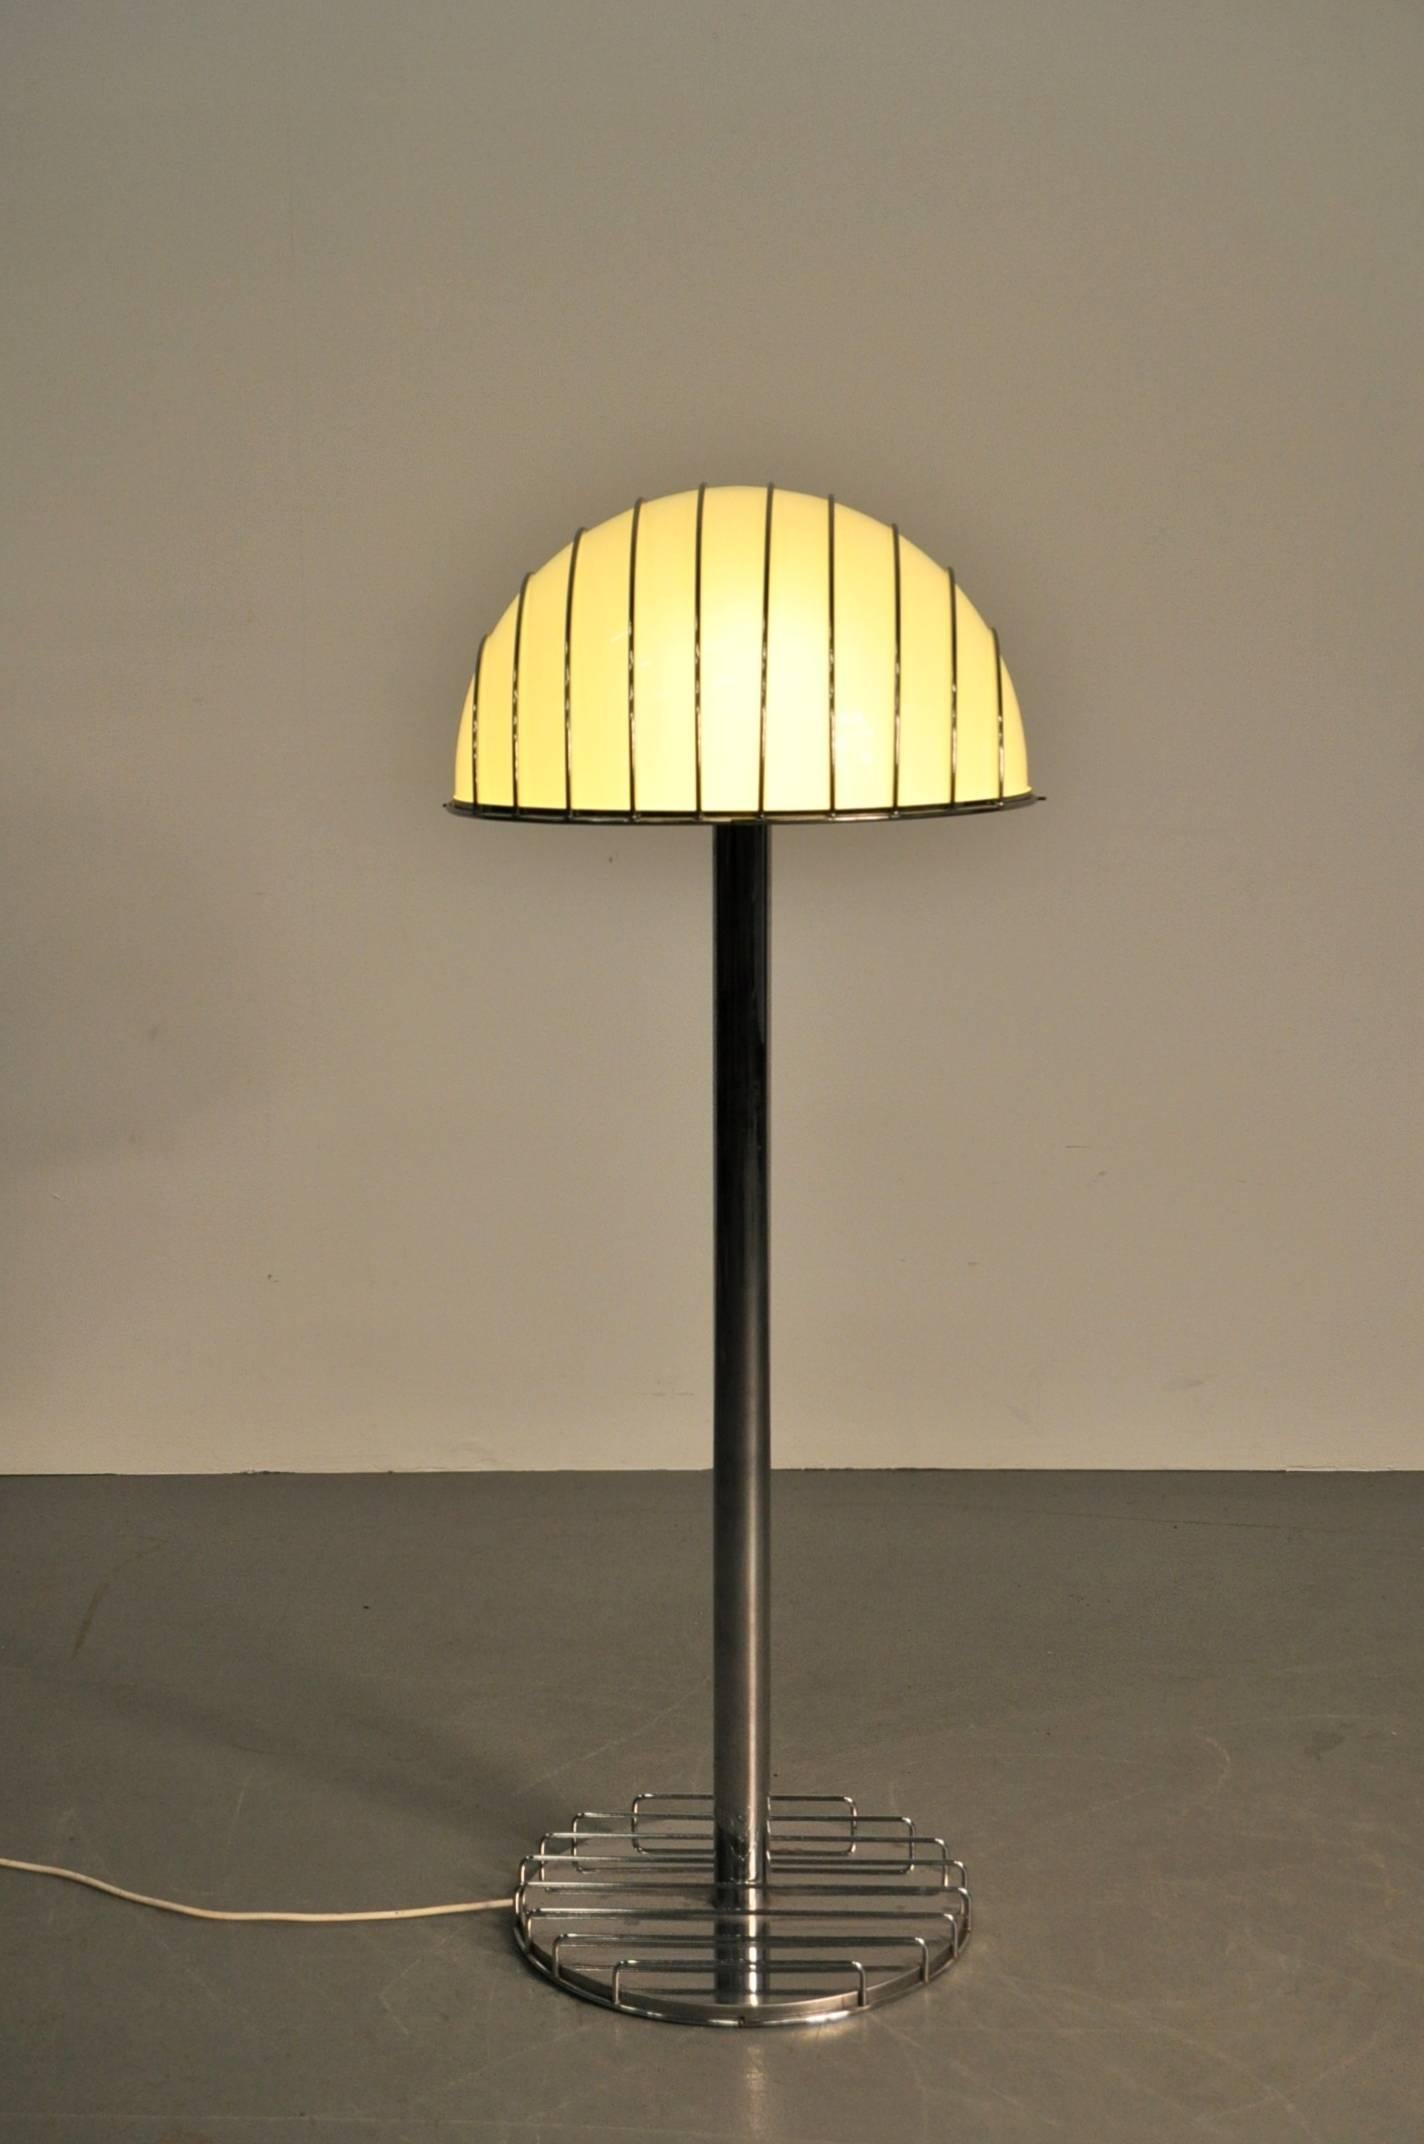 Beautiful floor lamp designed by Adalberto Dal Lago, manufactured by Esperia in Italy around 1960.

This eye-catching piece is made of high quality chrome metal with a plexiglass shade. The shade has metal bars around it, giving it a unique